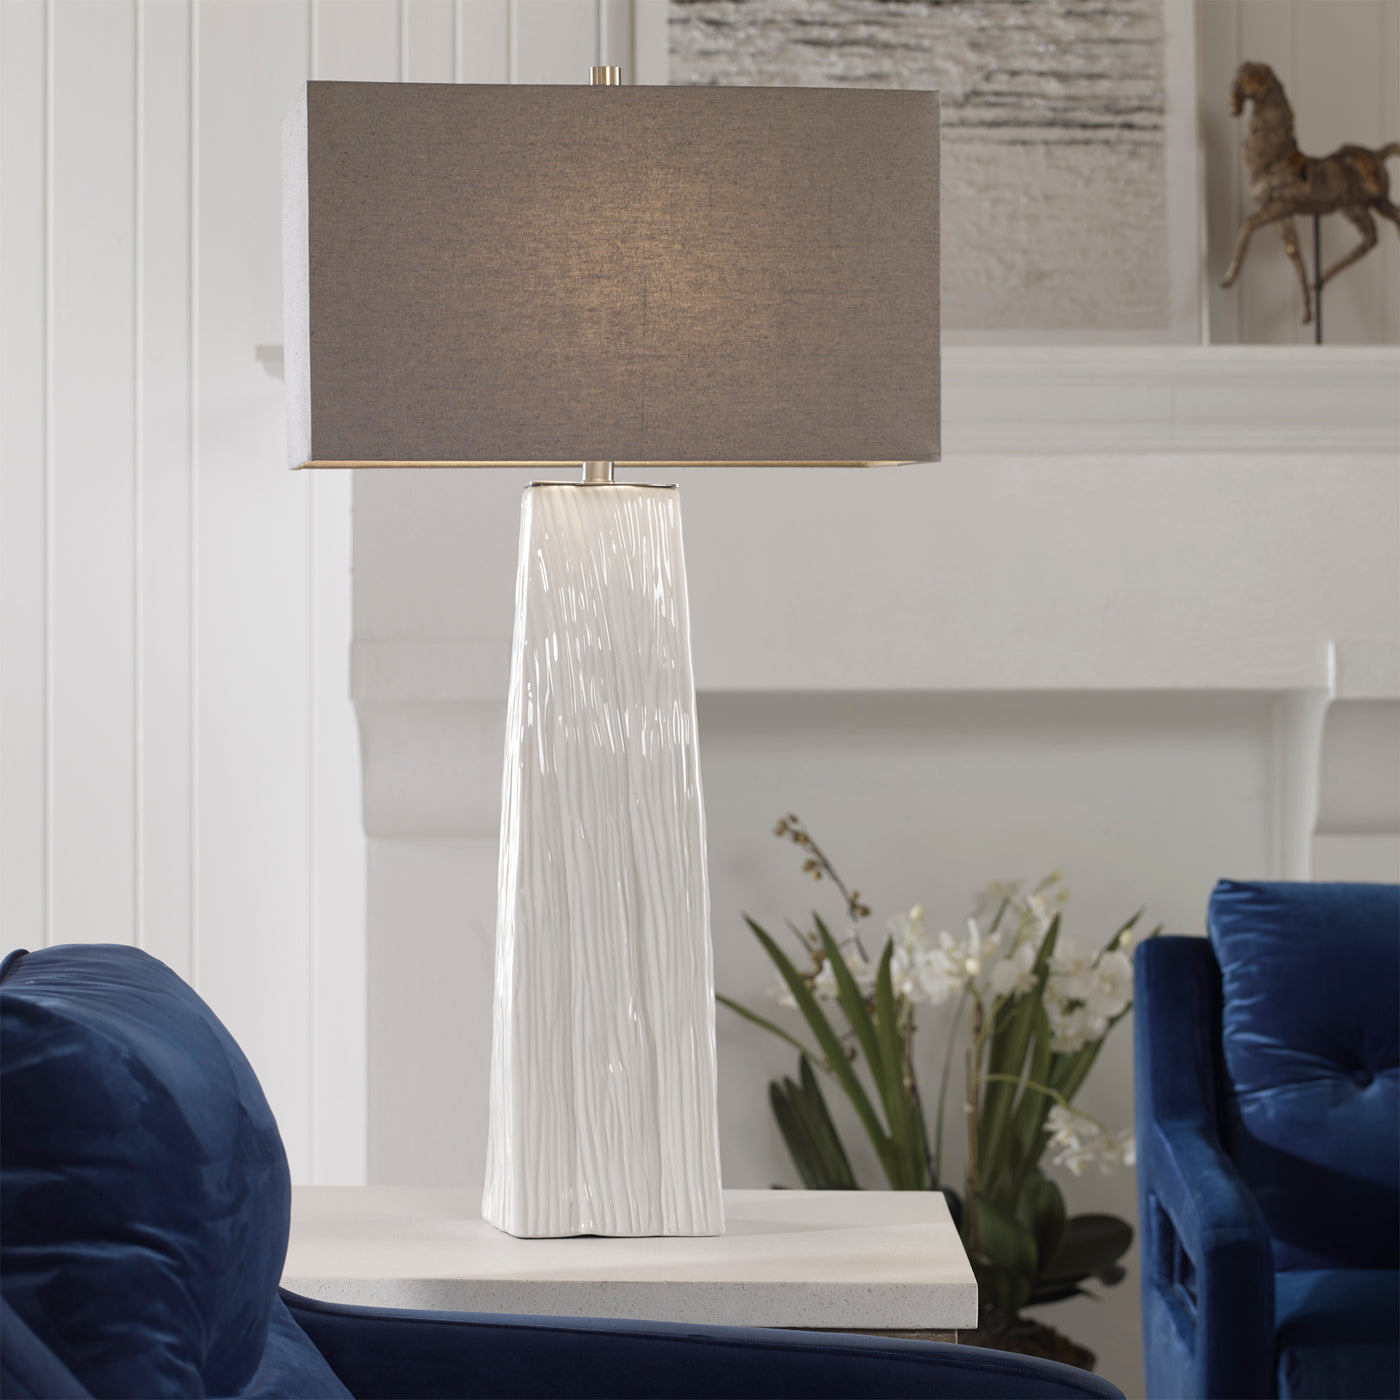 Elegant And Versatile, This Table Lamp Features A Gloss White Ceramic Base Featuring Organic Hand Carved Details And Brush...